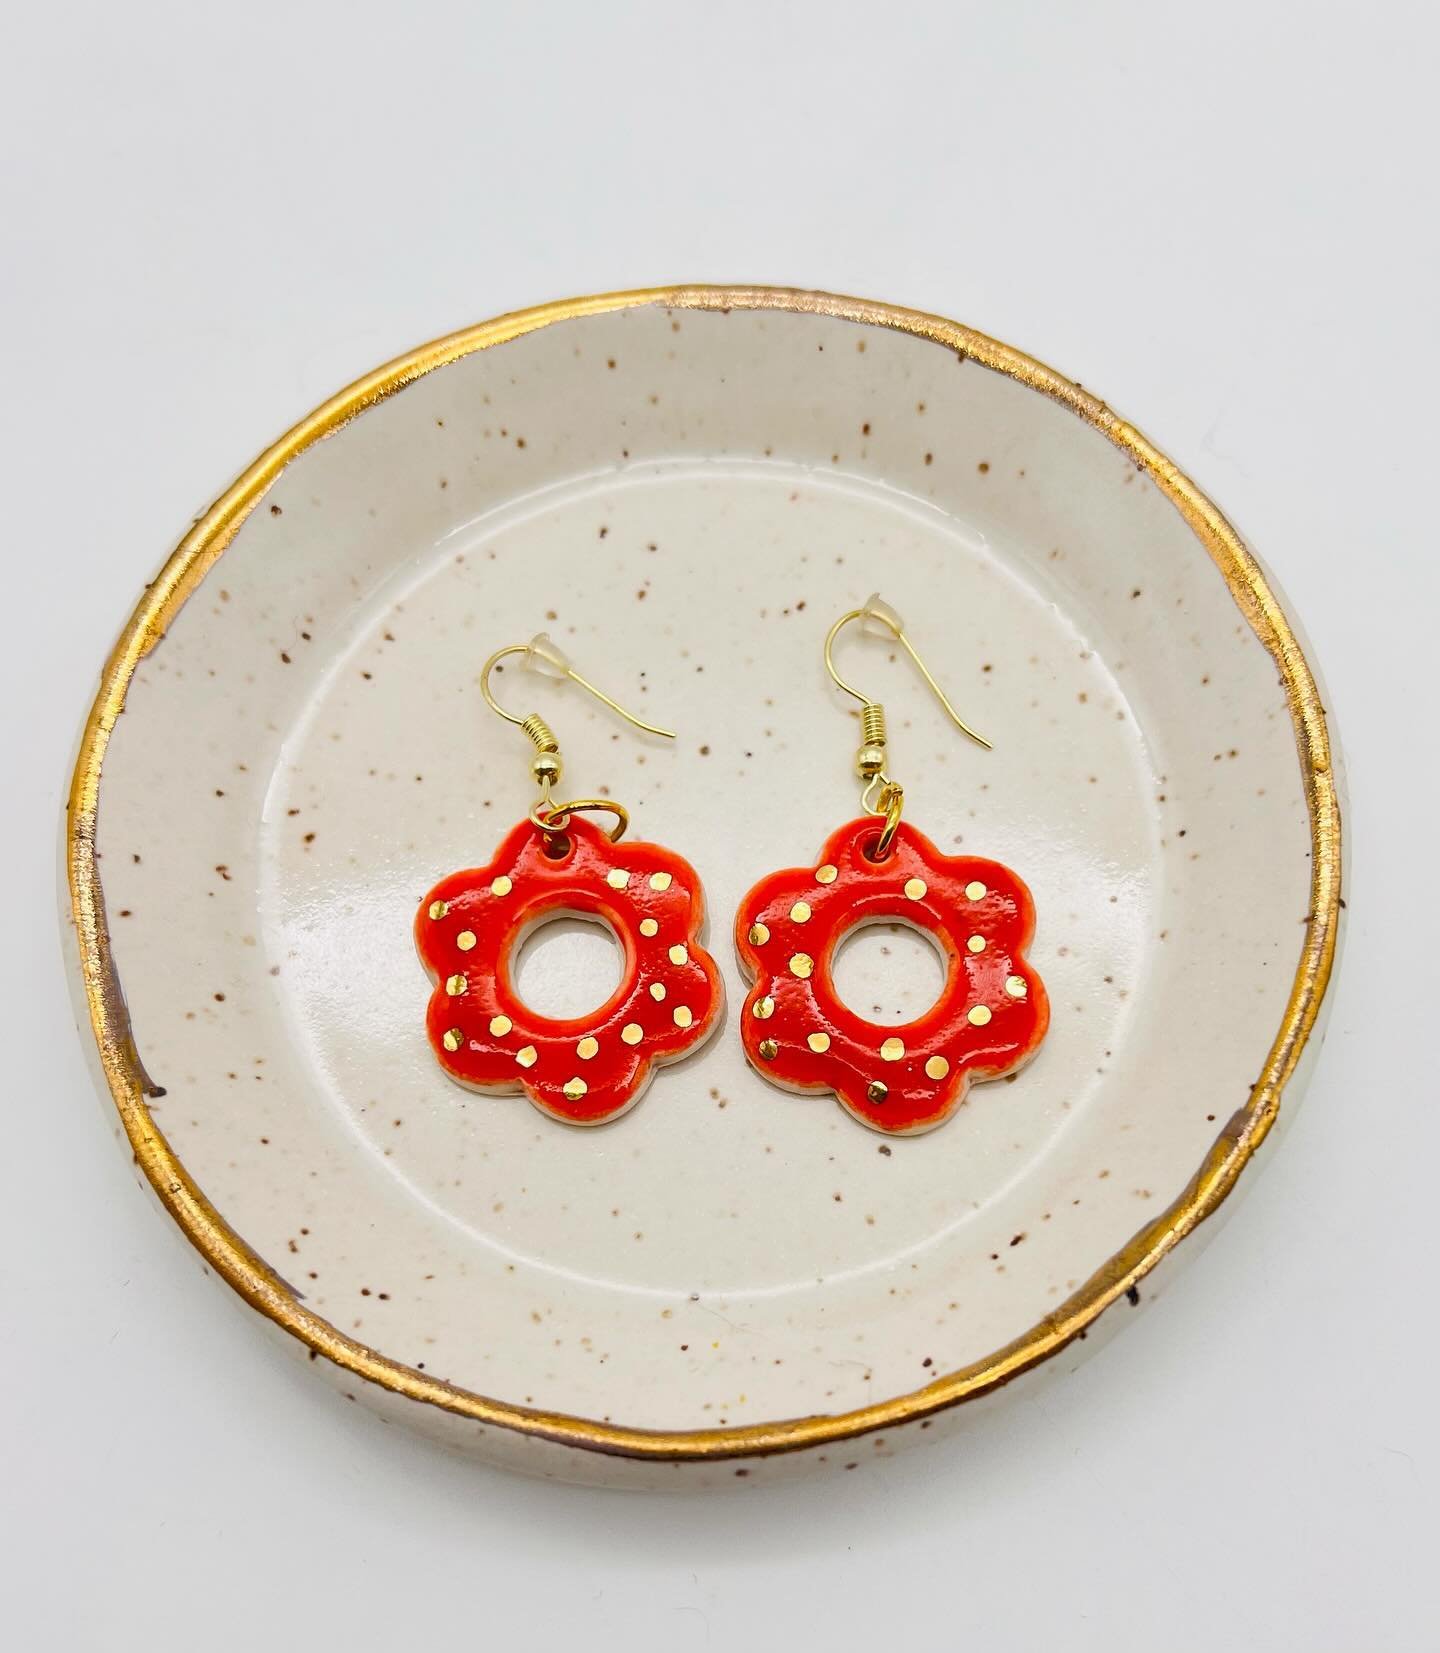 Bold and beautiful. Earrings that add pop and sparkle to complete your look. 🌟❤️😍
.
.
.
#ceramicearrings #orangeandgold #orangeearrings #orangegold #goldluster #goldlusterceramic #giftsformom #sparkleearrings #earringstyle #uniqueearrings